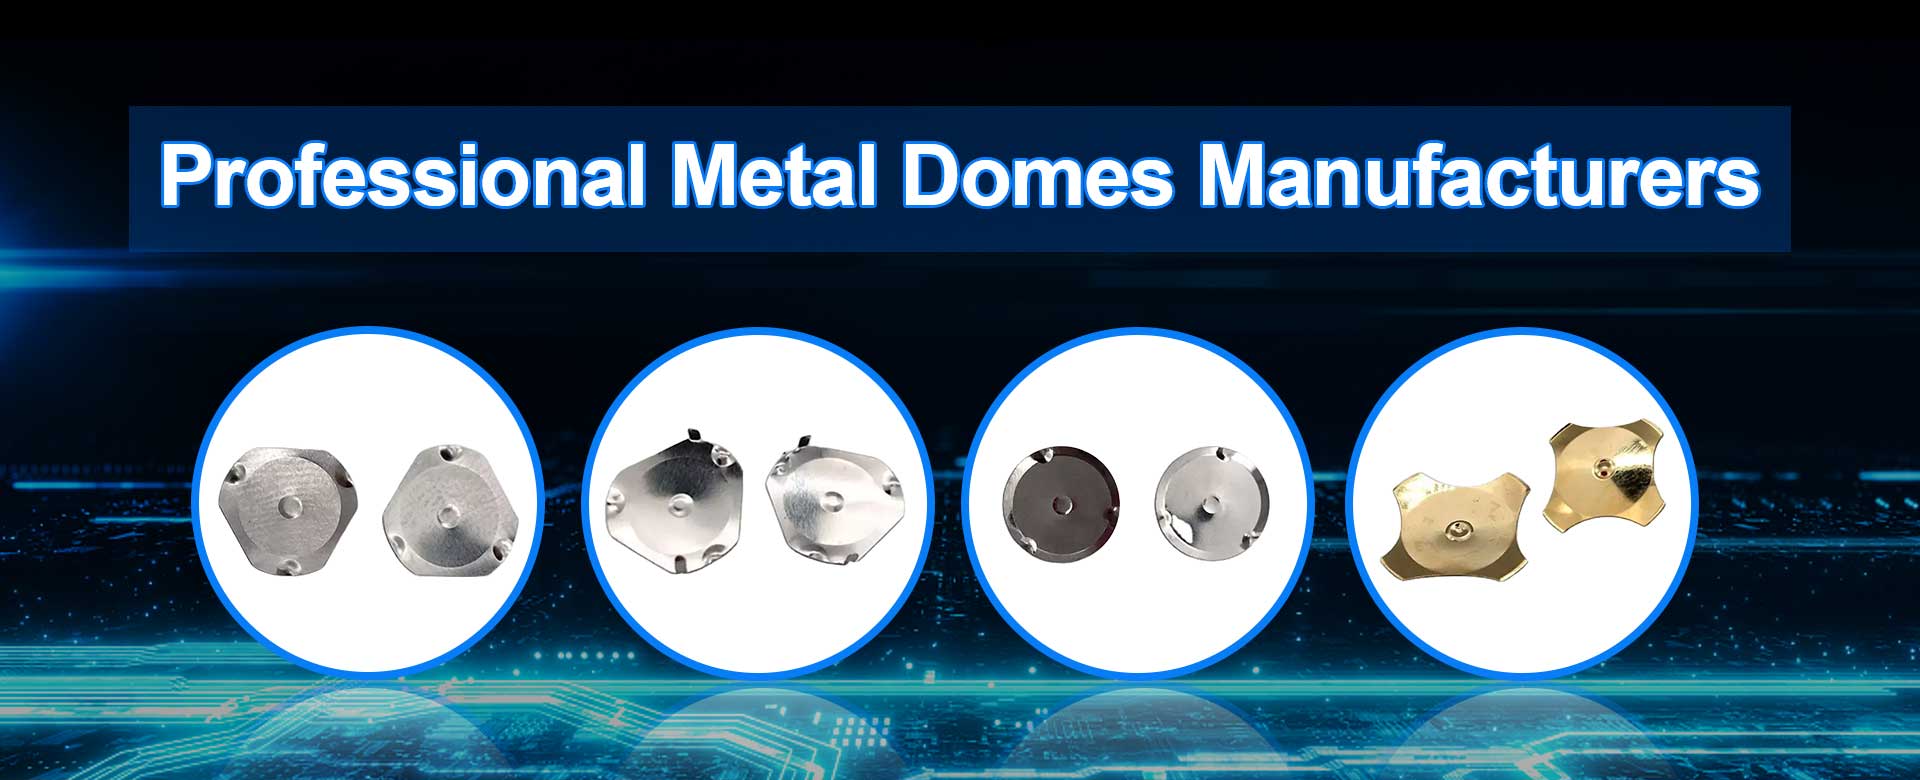 Oblong Metal Domes Manufacturers